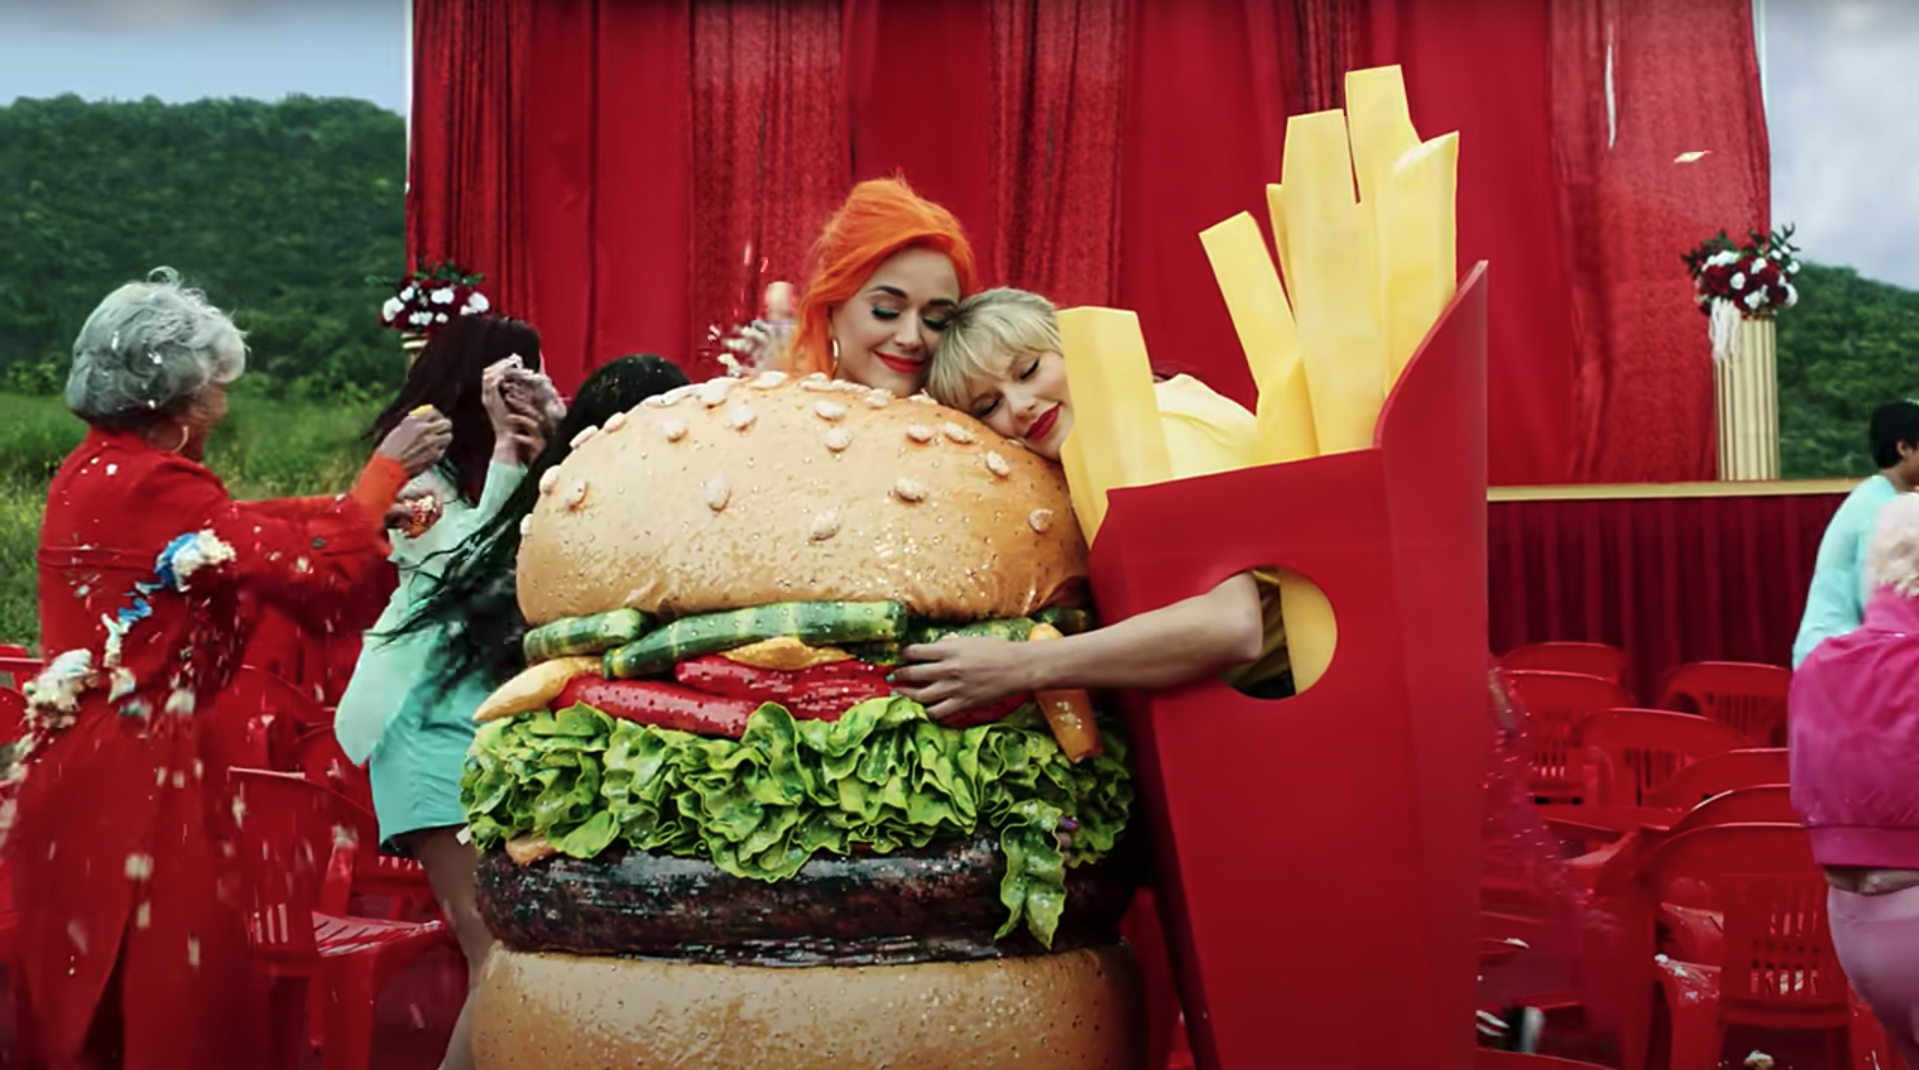 Katy Perry in a hamburger suit is hugged by Taylor Swift in french fry suit in the &quot;You Need to Calm Down&quot; music video